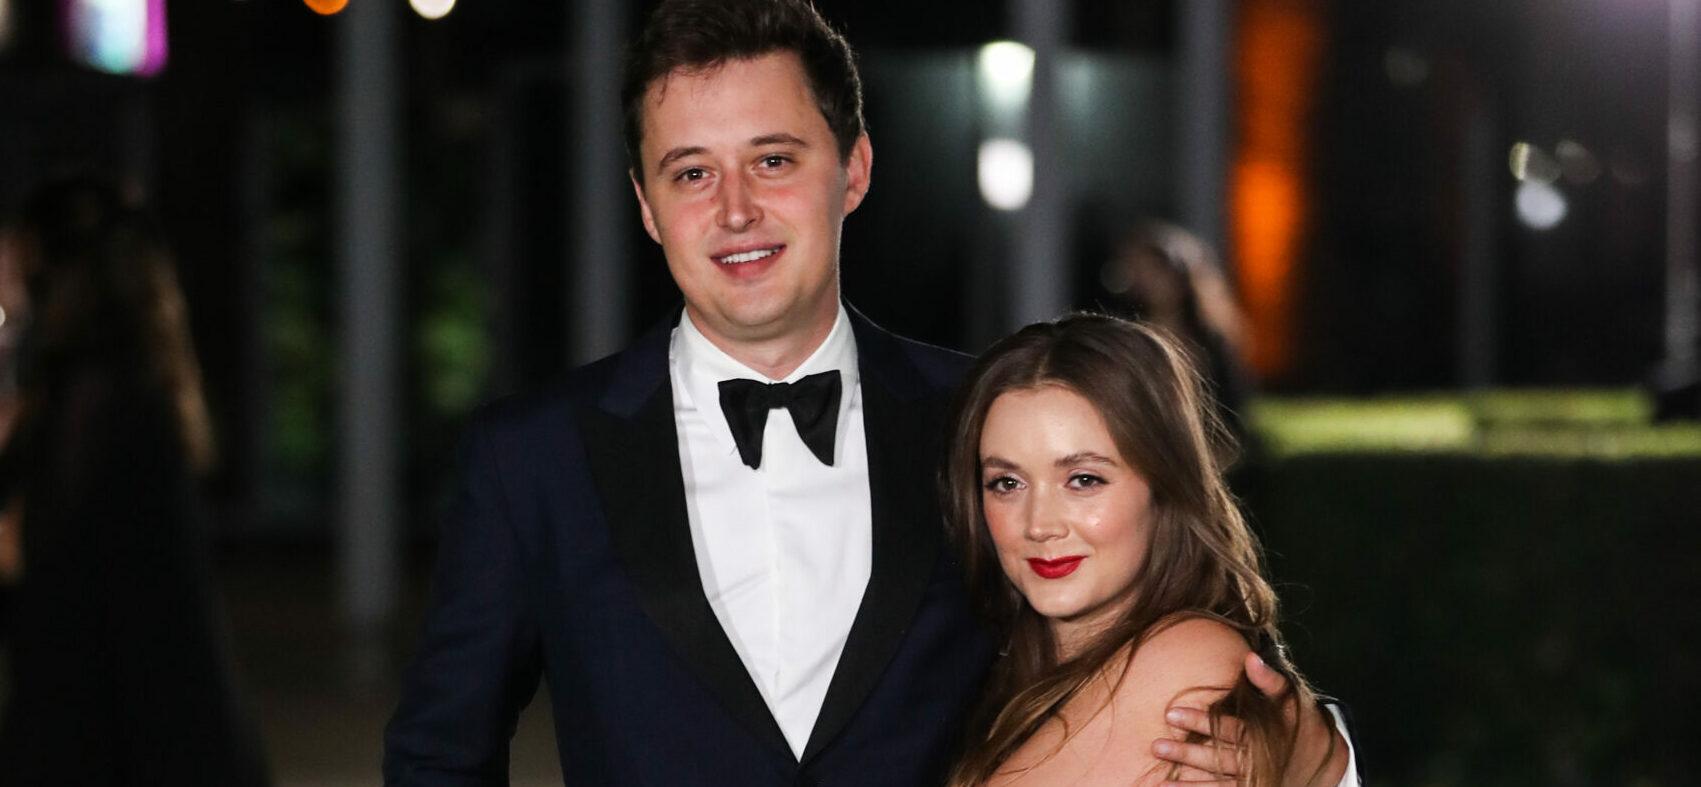 Billie Lourd Celebrates 1st Anniversary To Austen Rydell With Pics of Unseen Nuptials